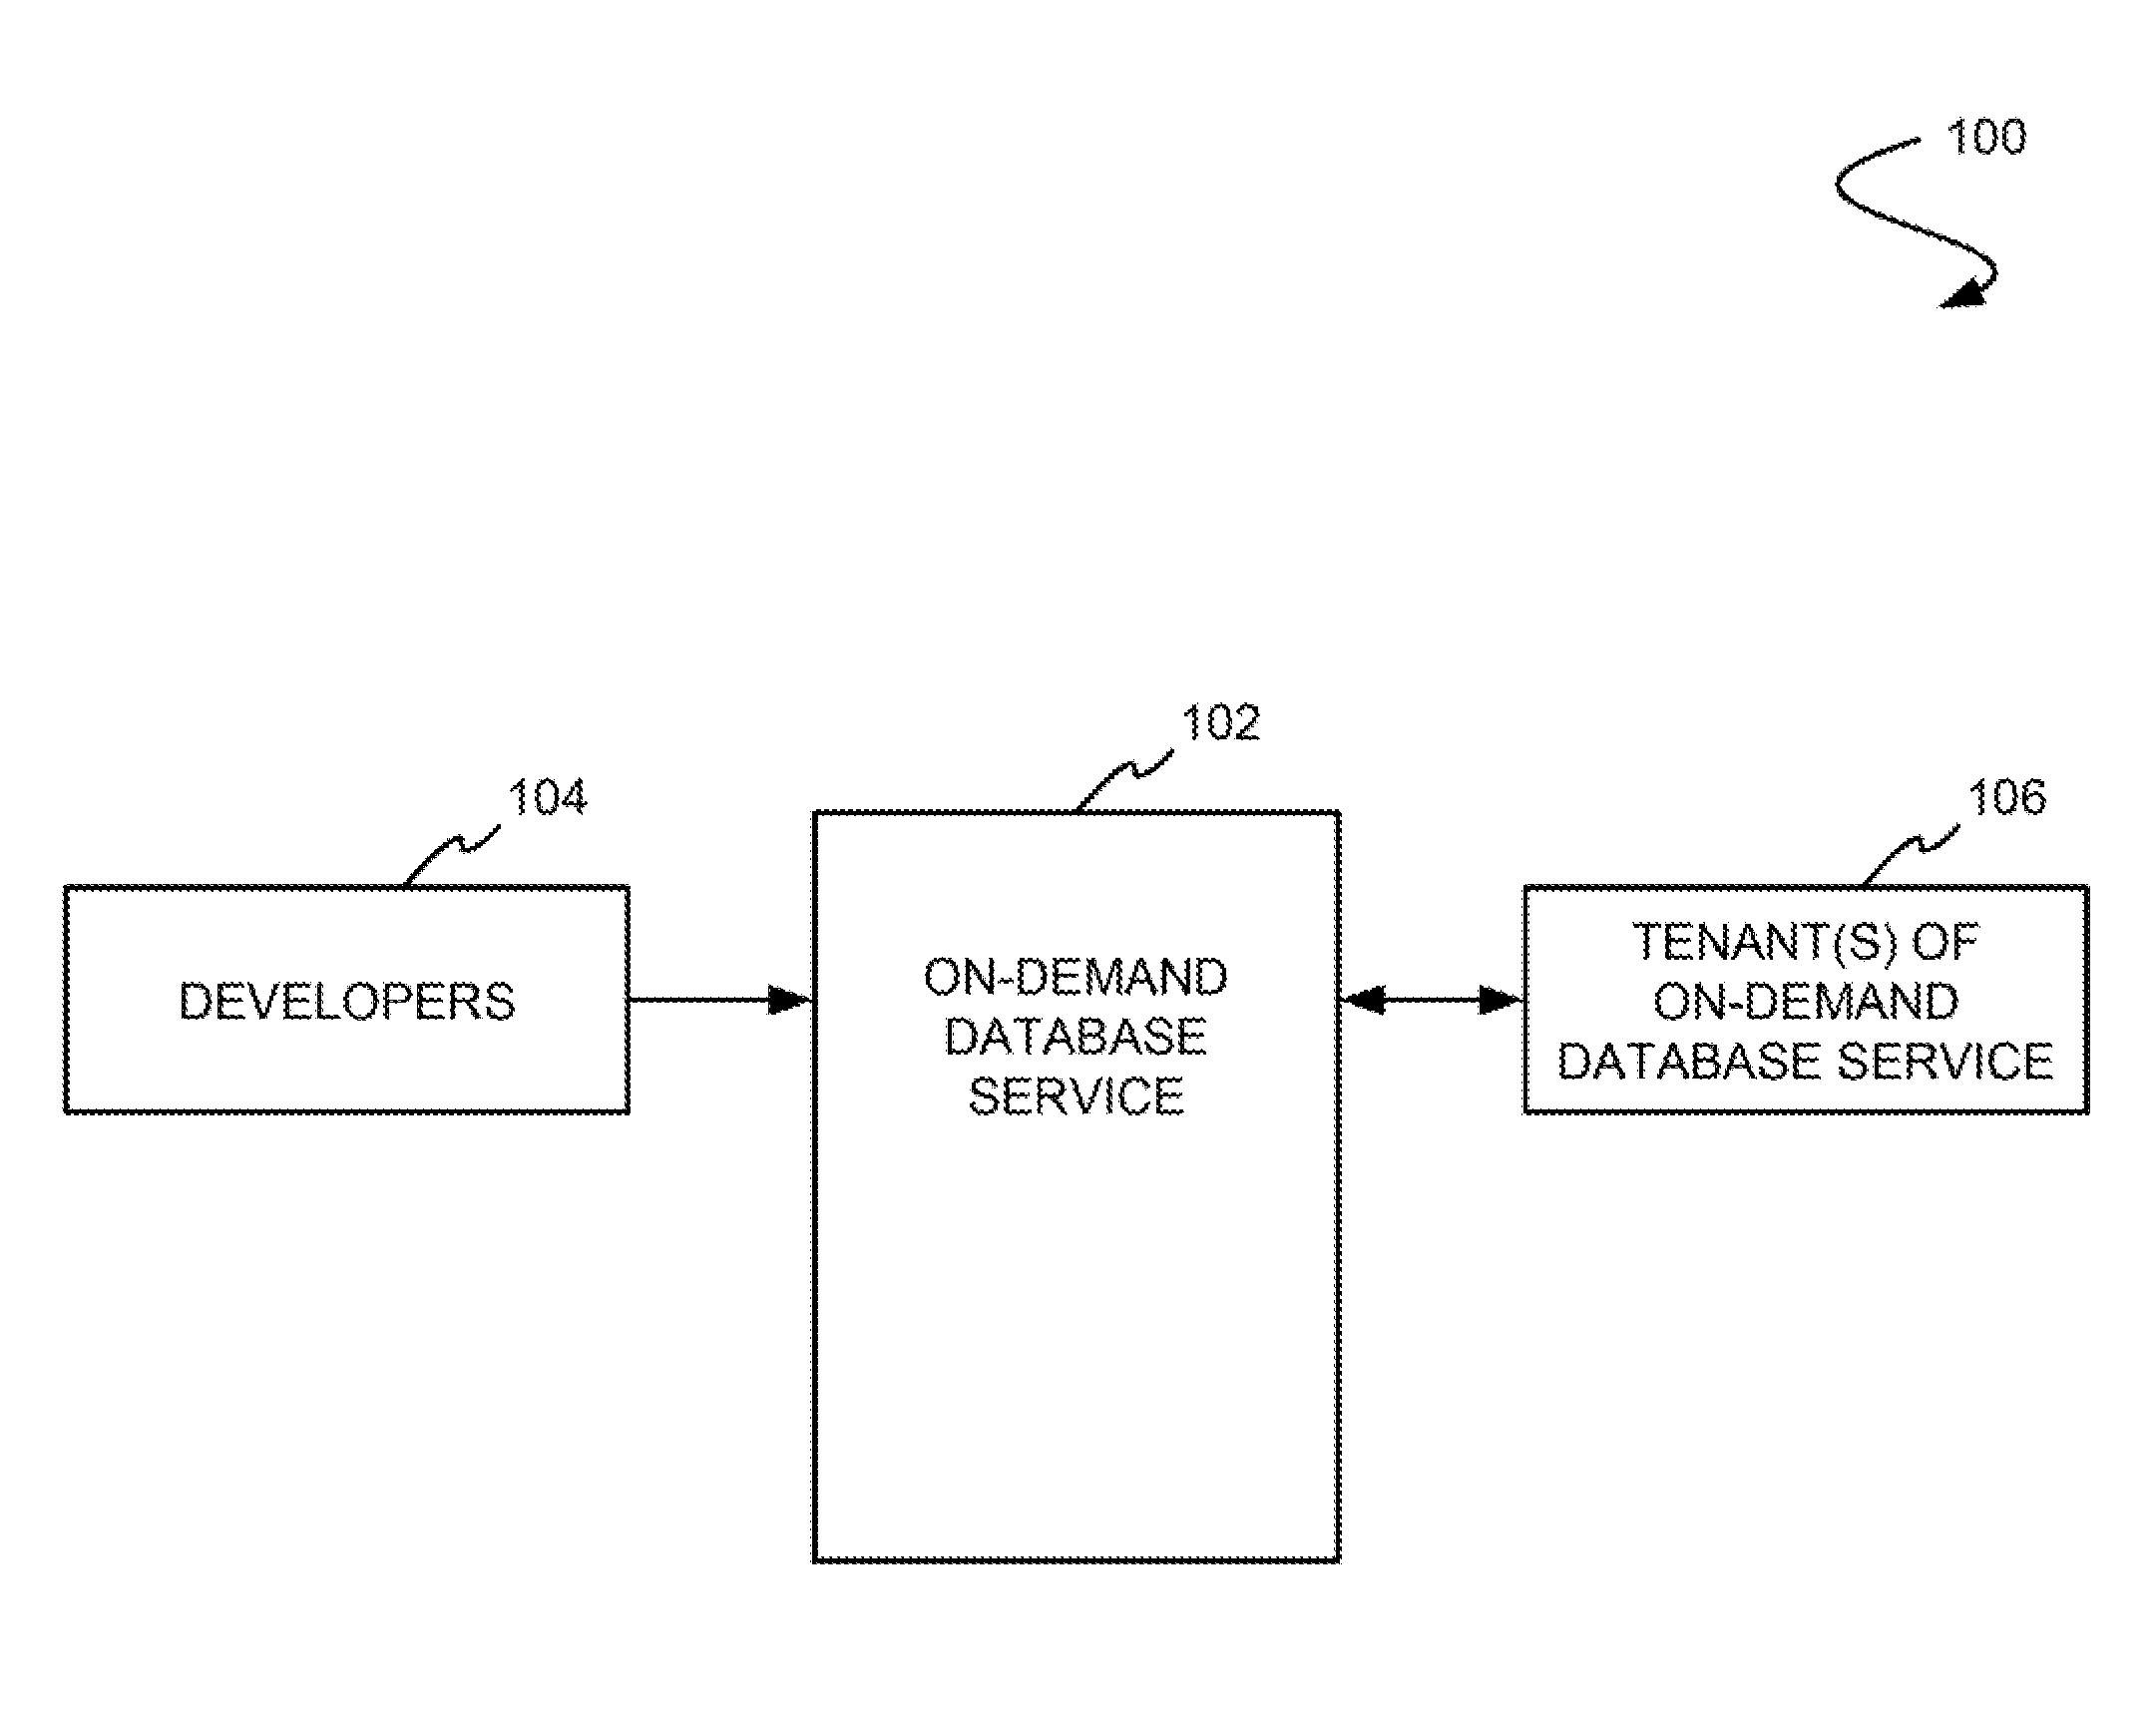 Method and system for allowing access to developed applications via a multi-tenant on-demand database service